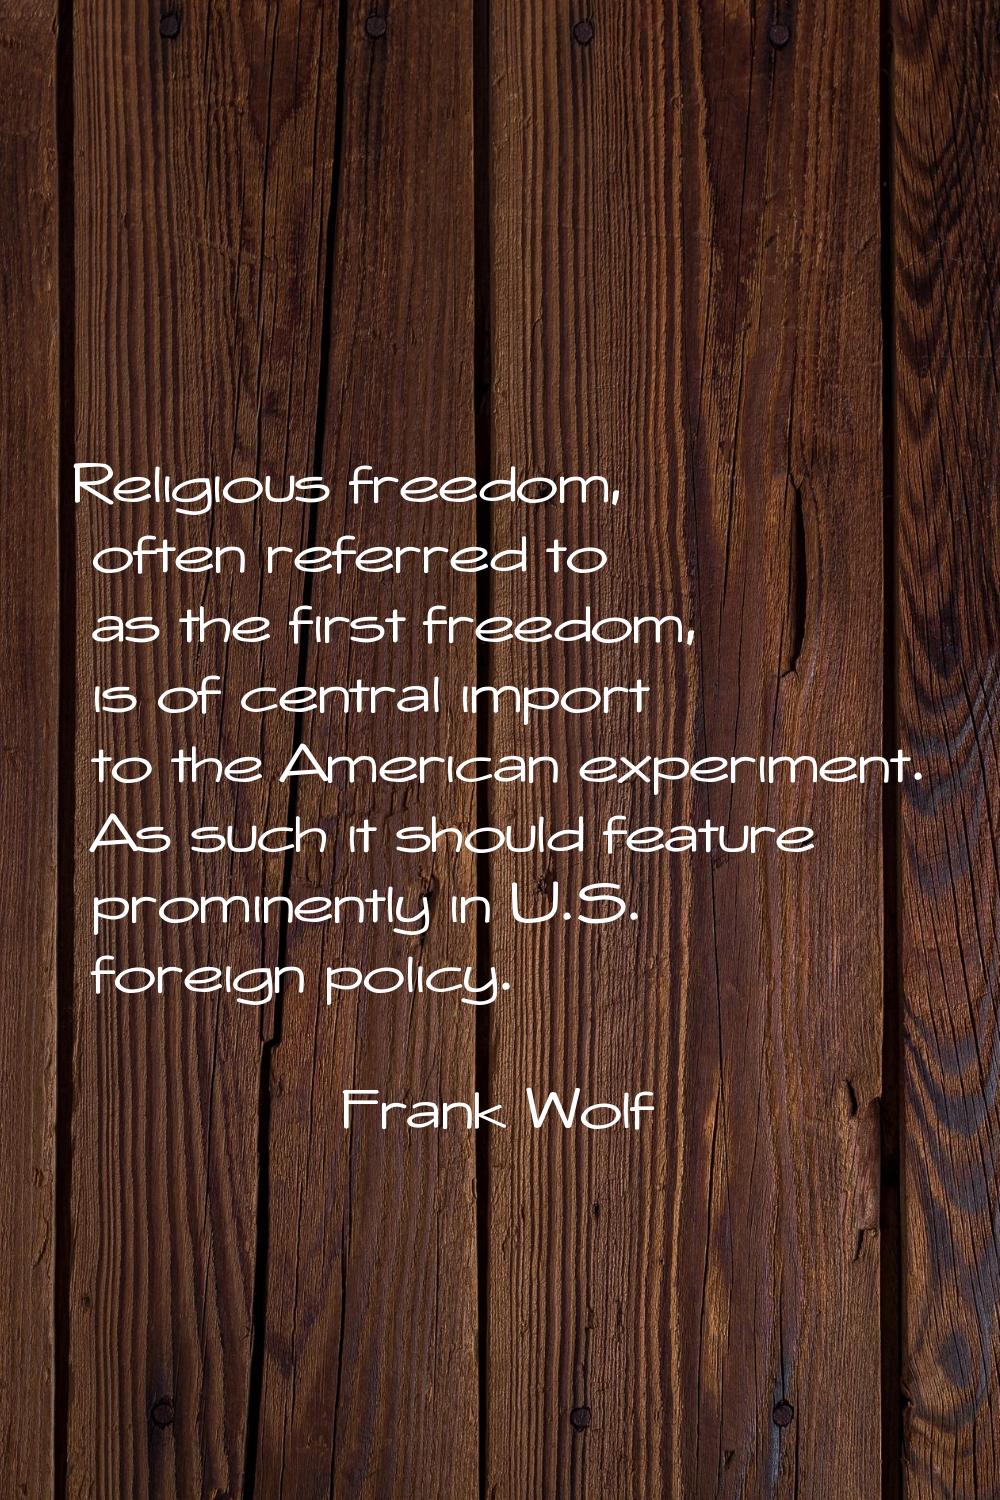 Religious freedom, often referred to as the first freedom, is of central import to the American exp